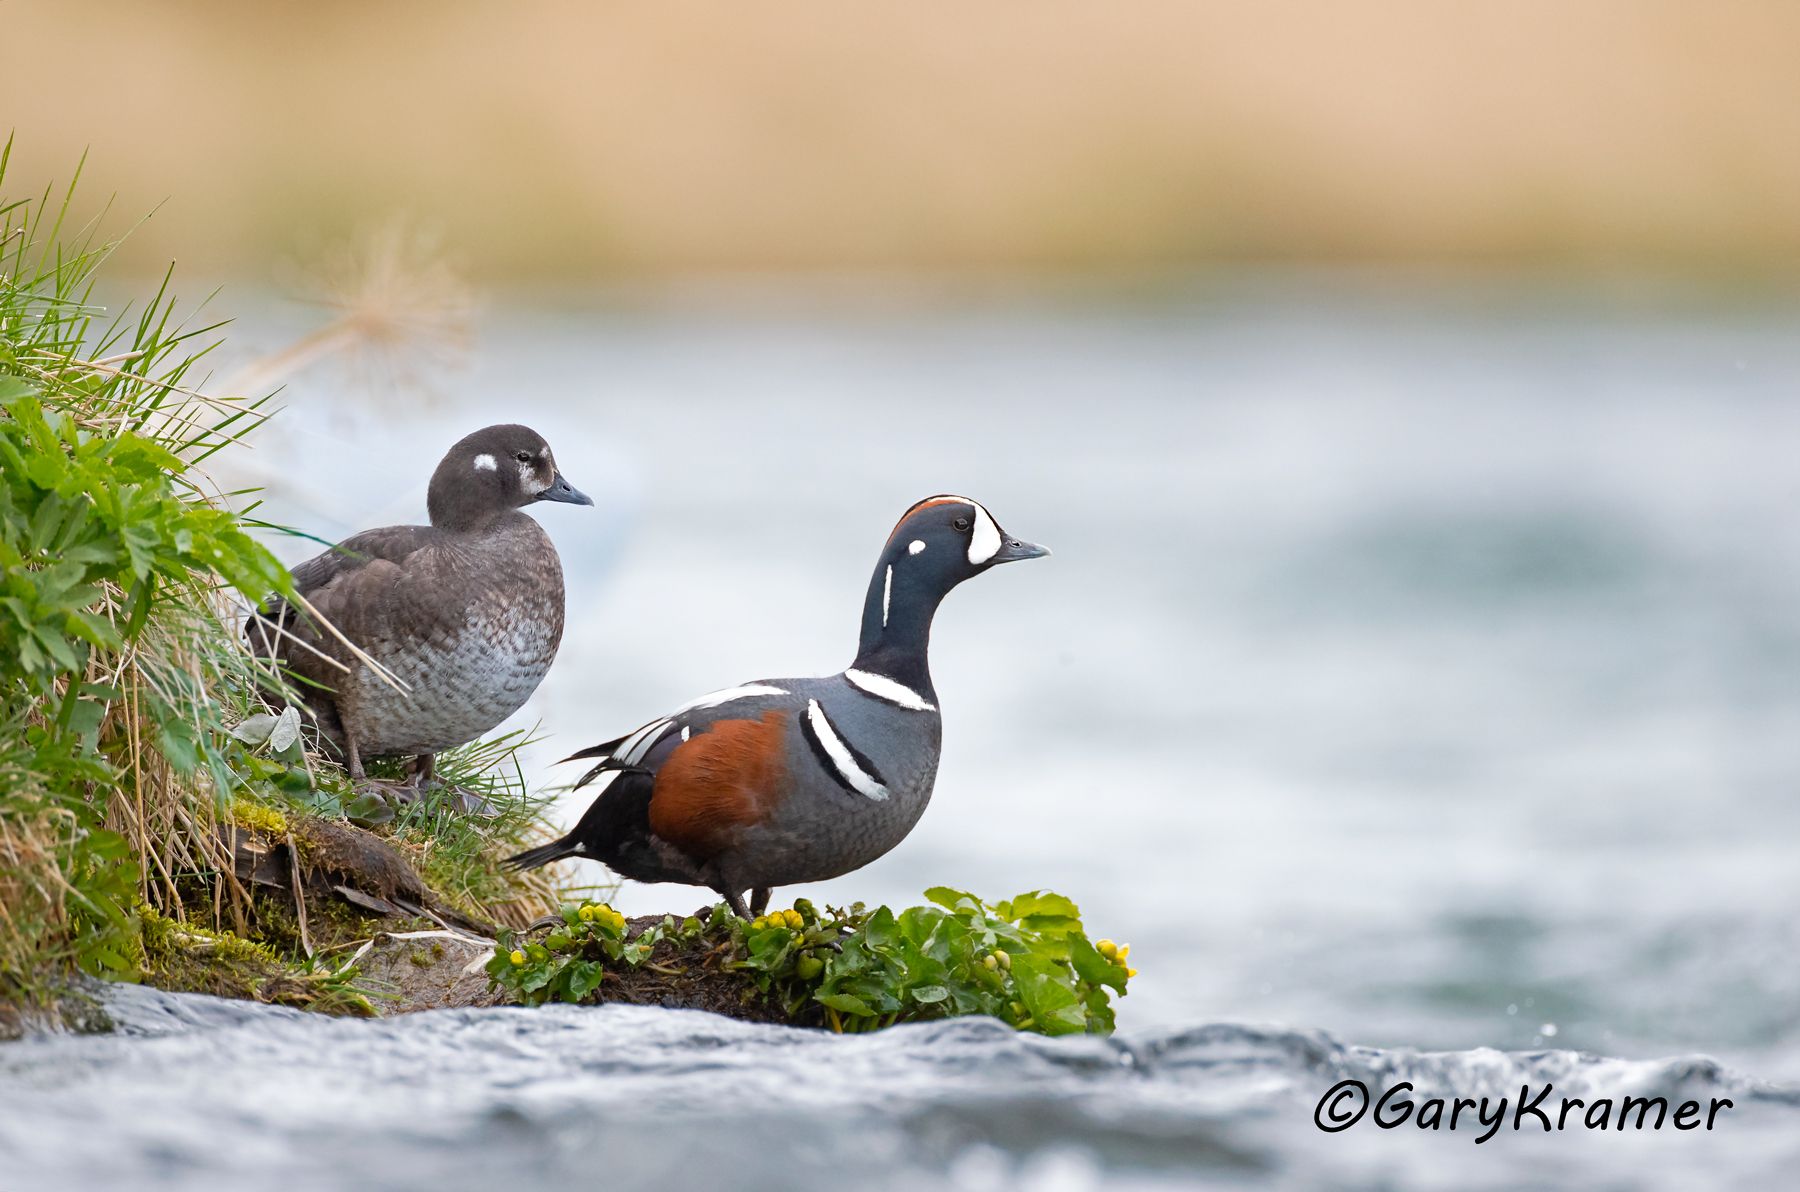 Harlequin Duck (Histrionicus histrionicus) - NBWH#457d(2)